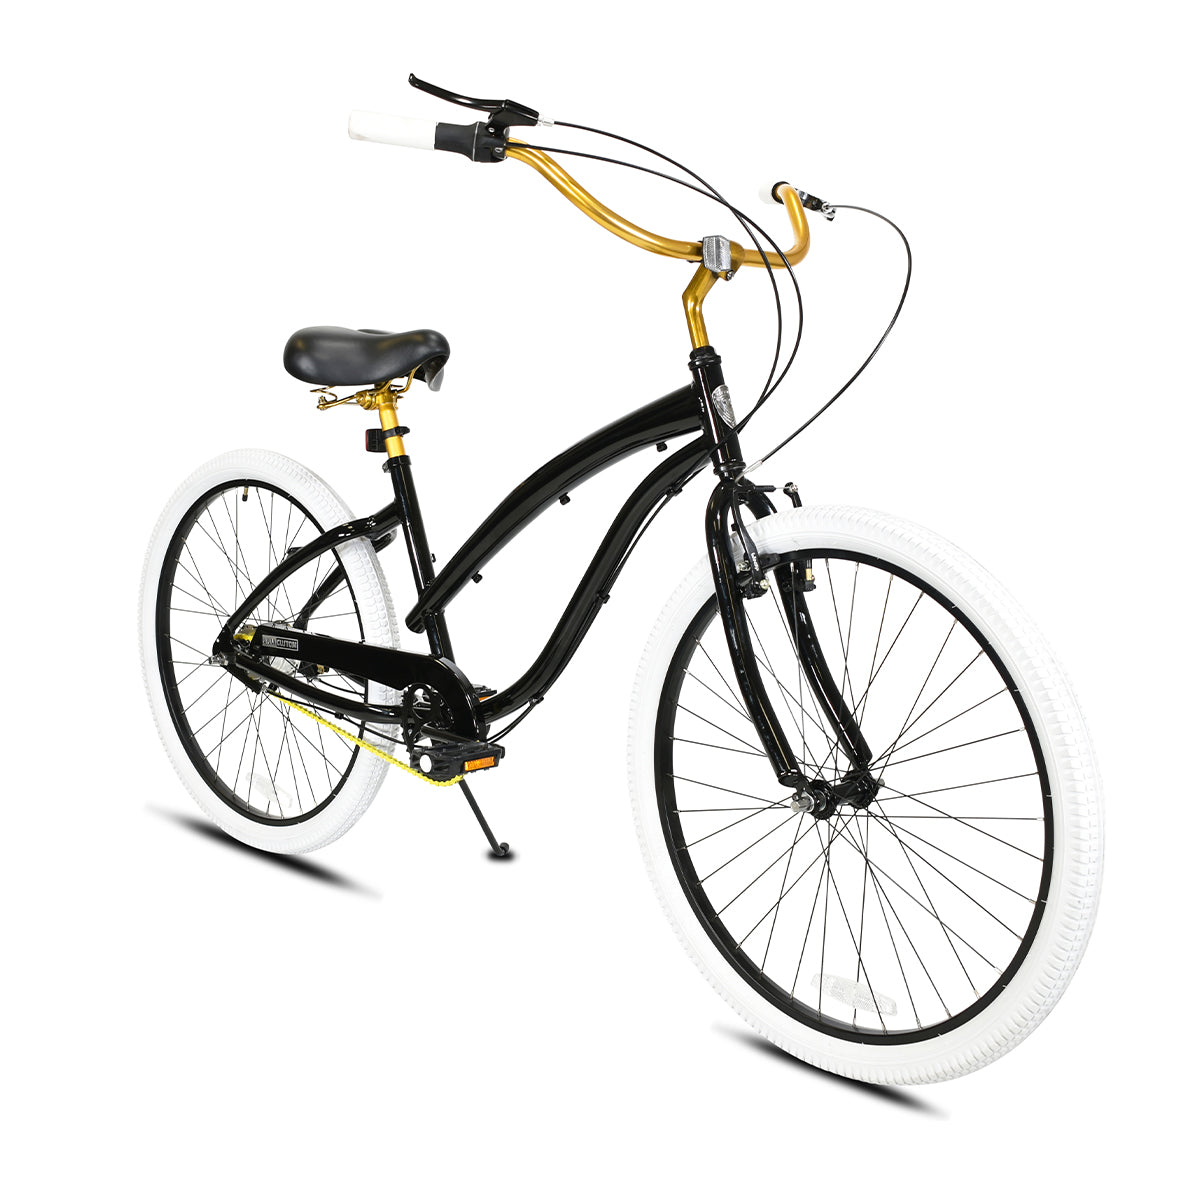 Mabel 3-Speed Cruiser Black Step-Thru Frame, Handbrakes, Shifter, Wheels, Pedals, and Saddle with Gold Chain, Handlebar, and Posts with White Grips and Tires